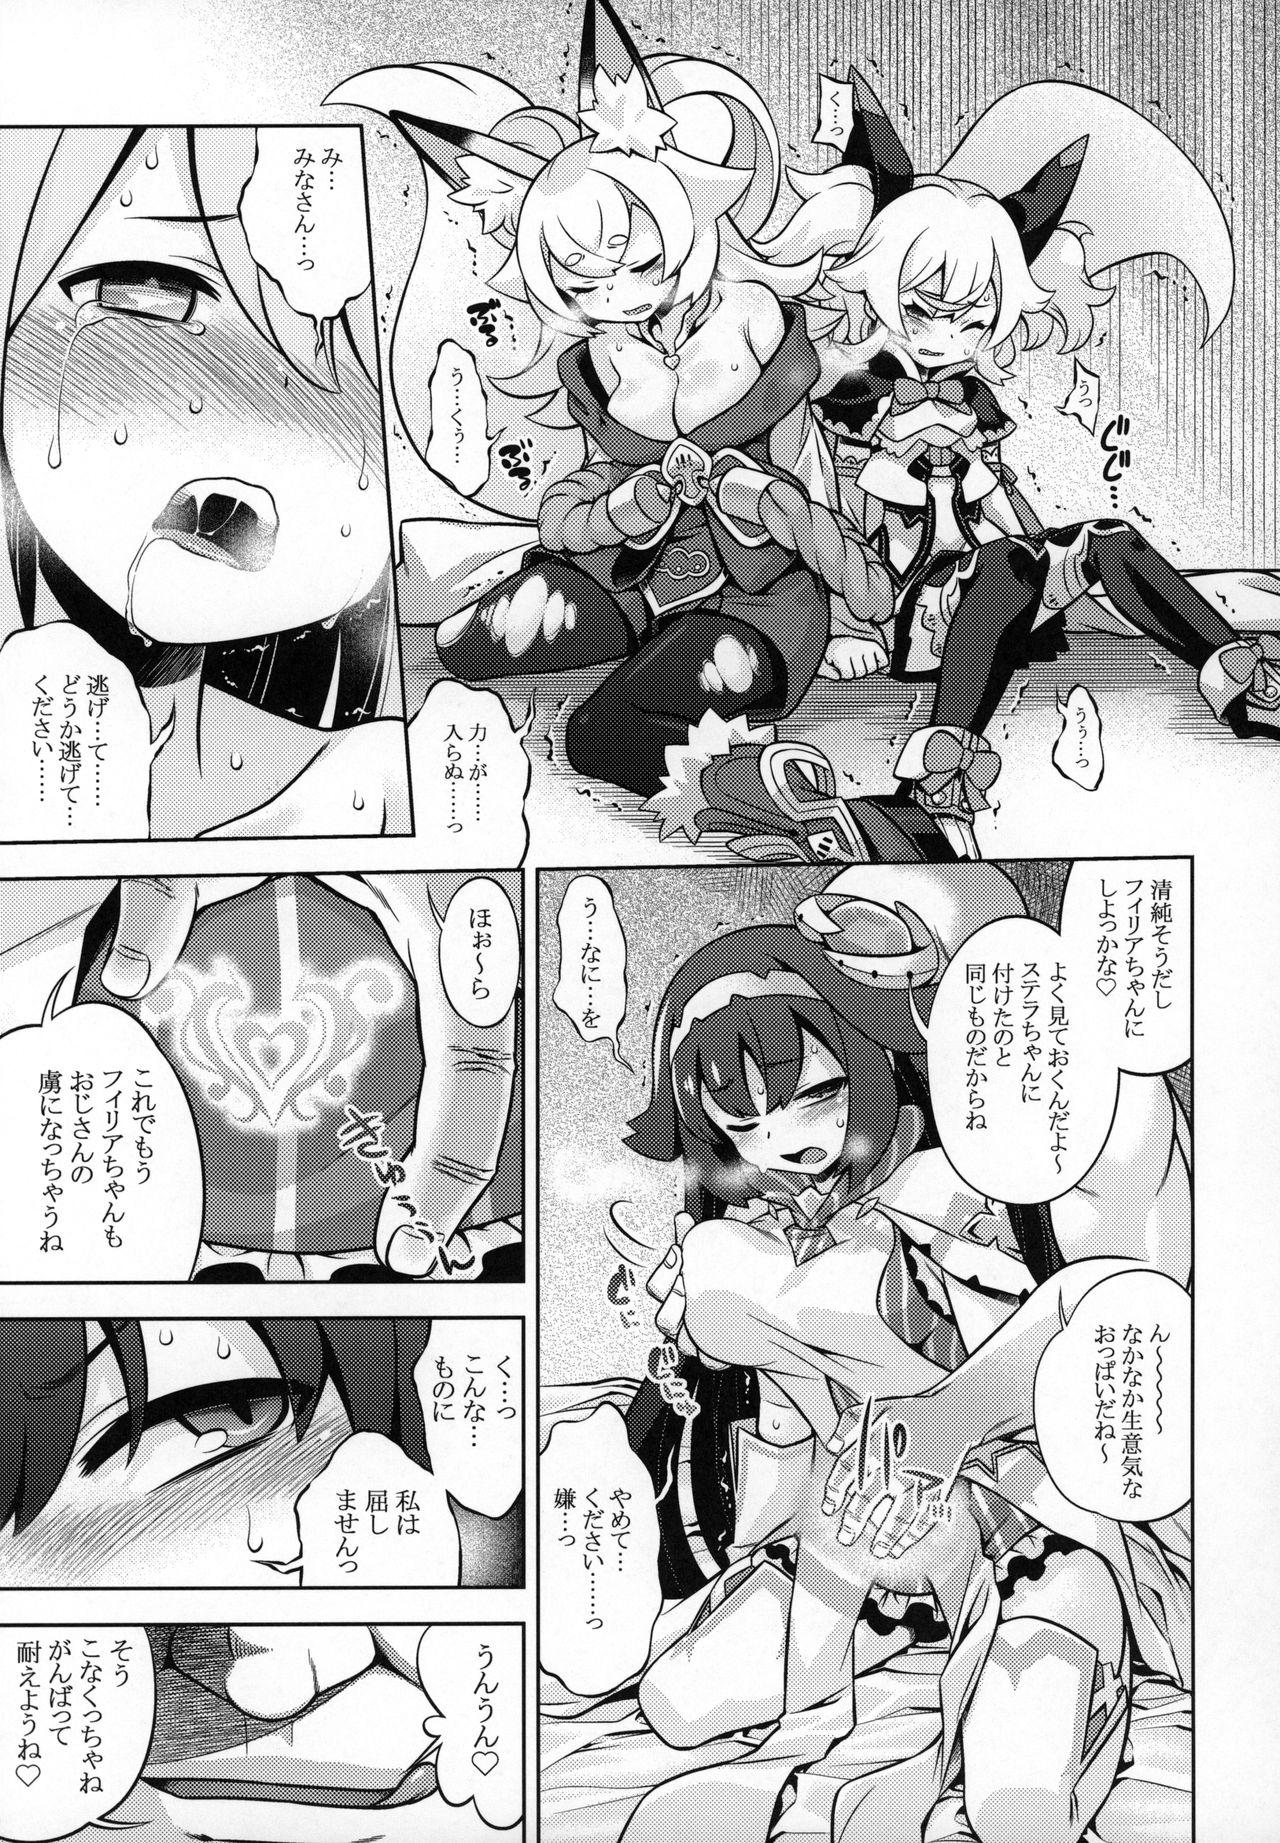 Longhair WorFli no Anone - World flipper Culito - Page 6